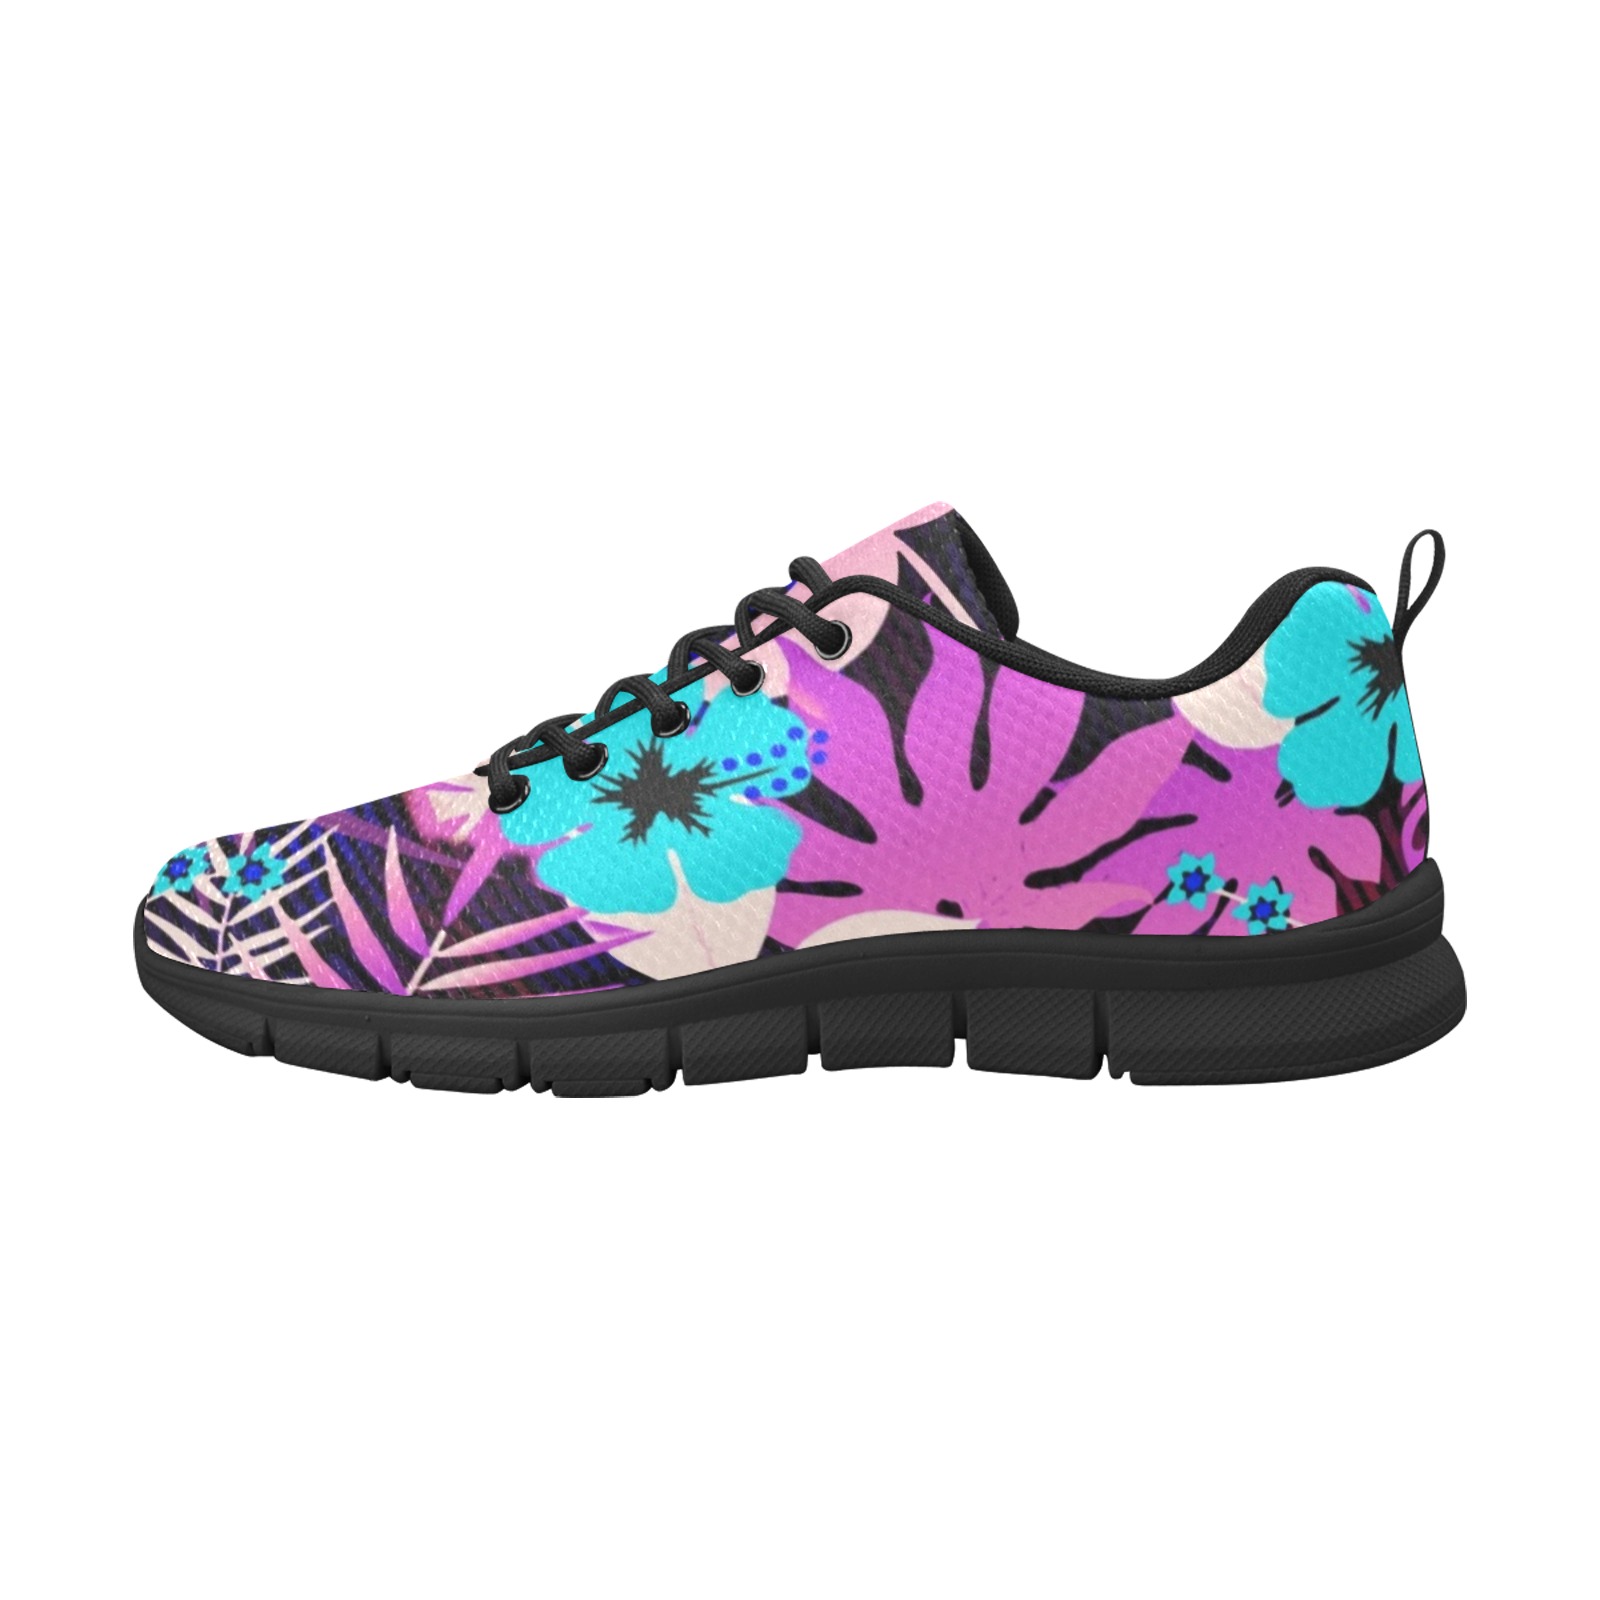 GROOVY FUNK THING FLORAL PURPLE Women's Breathable Running Shoes (Model 055)